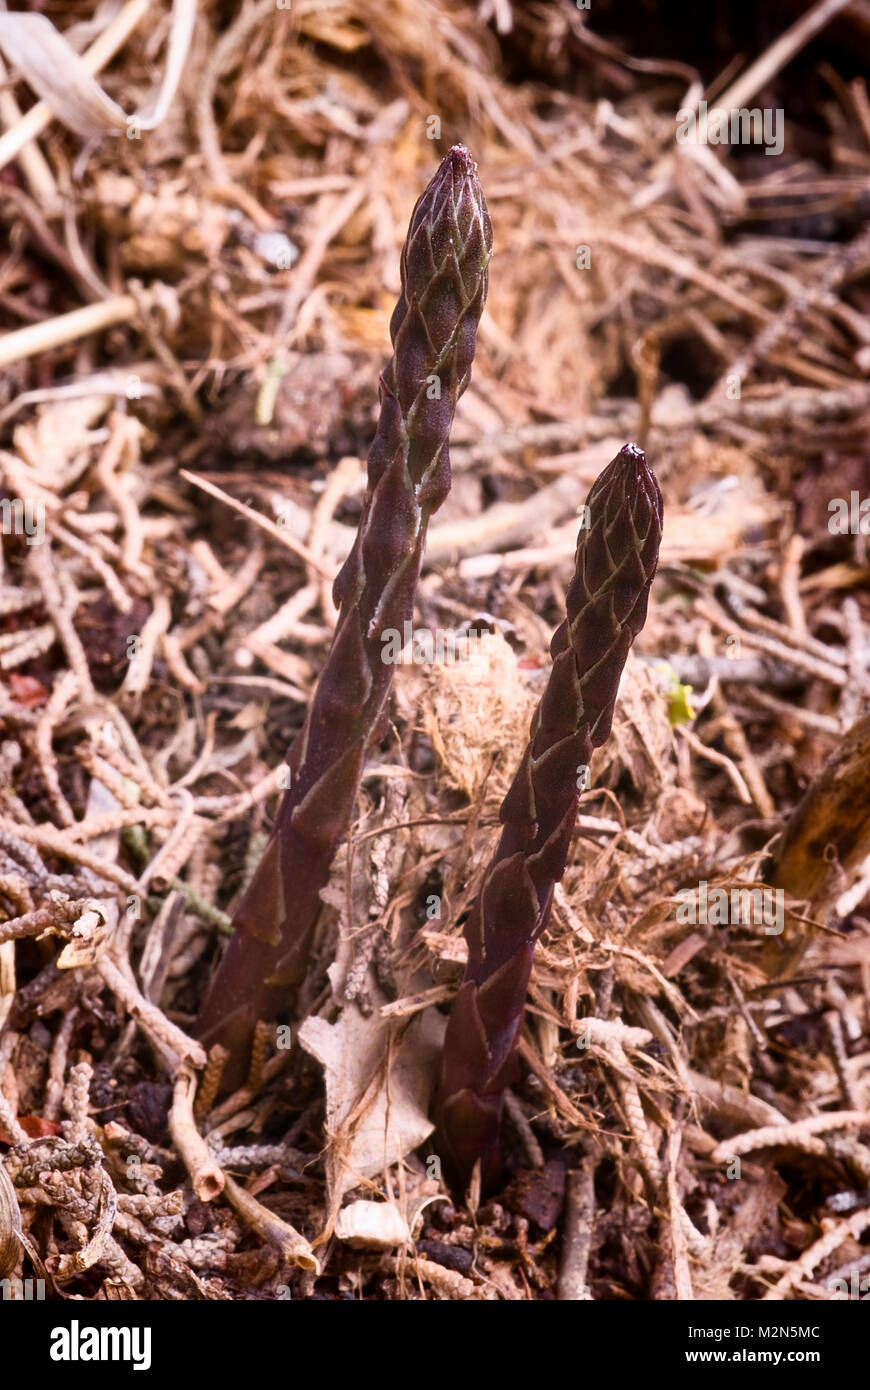 Wild asparagus (Asparagus acutifolius) just popped out of the ground Stock Photo